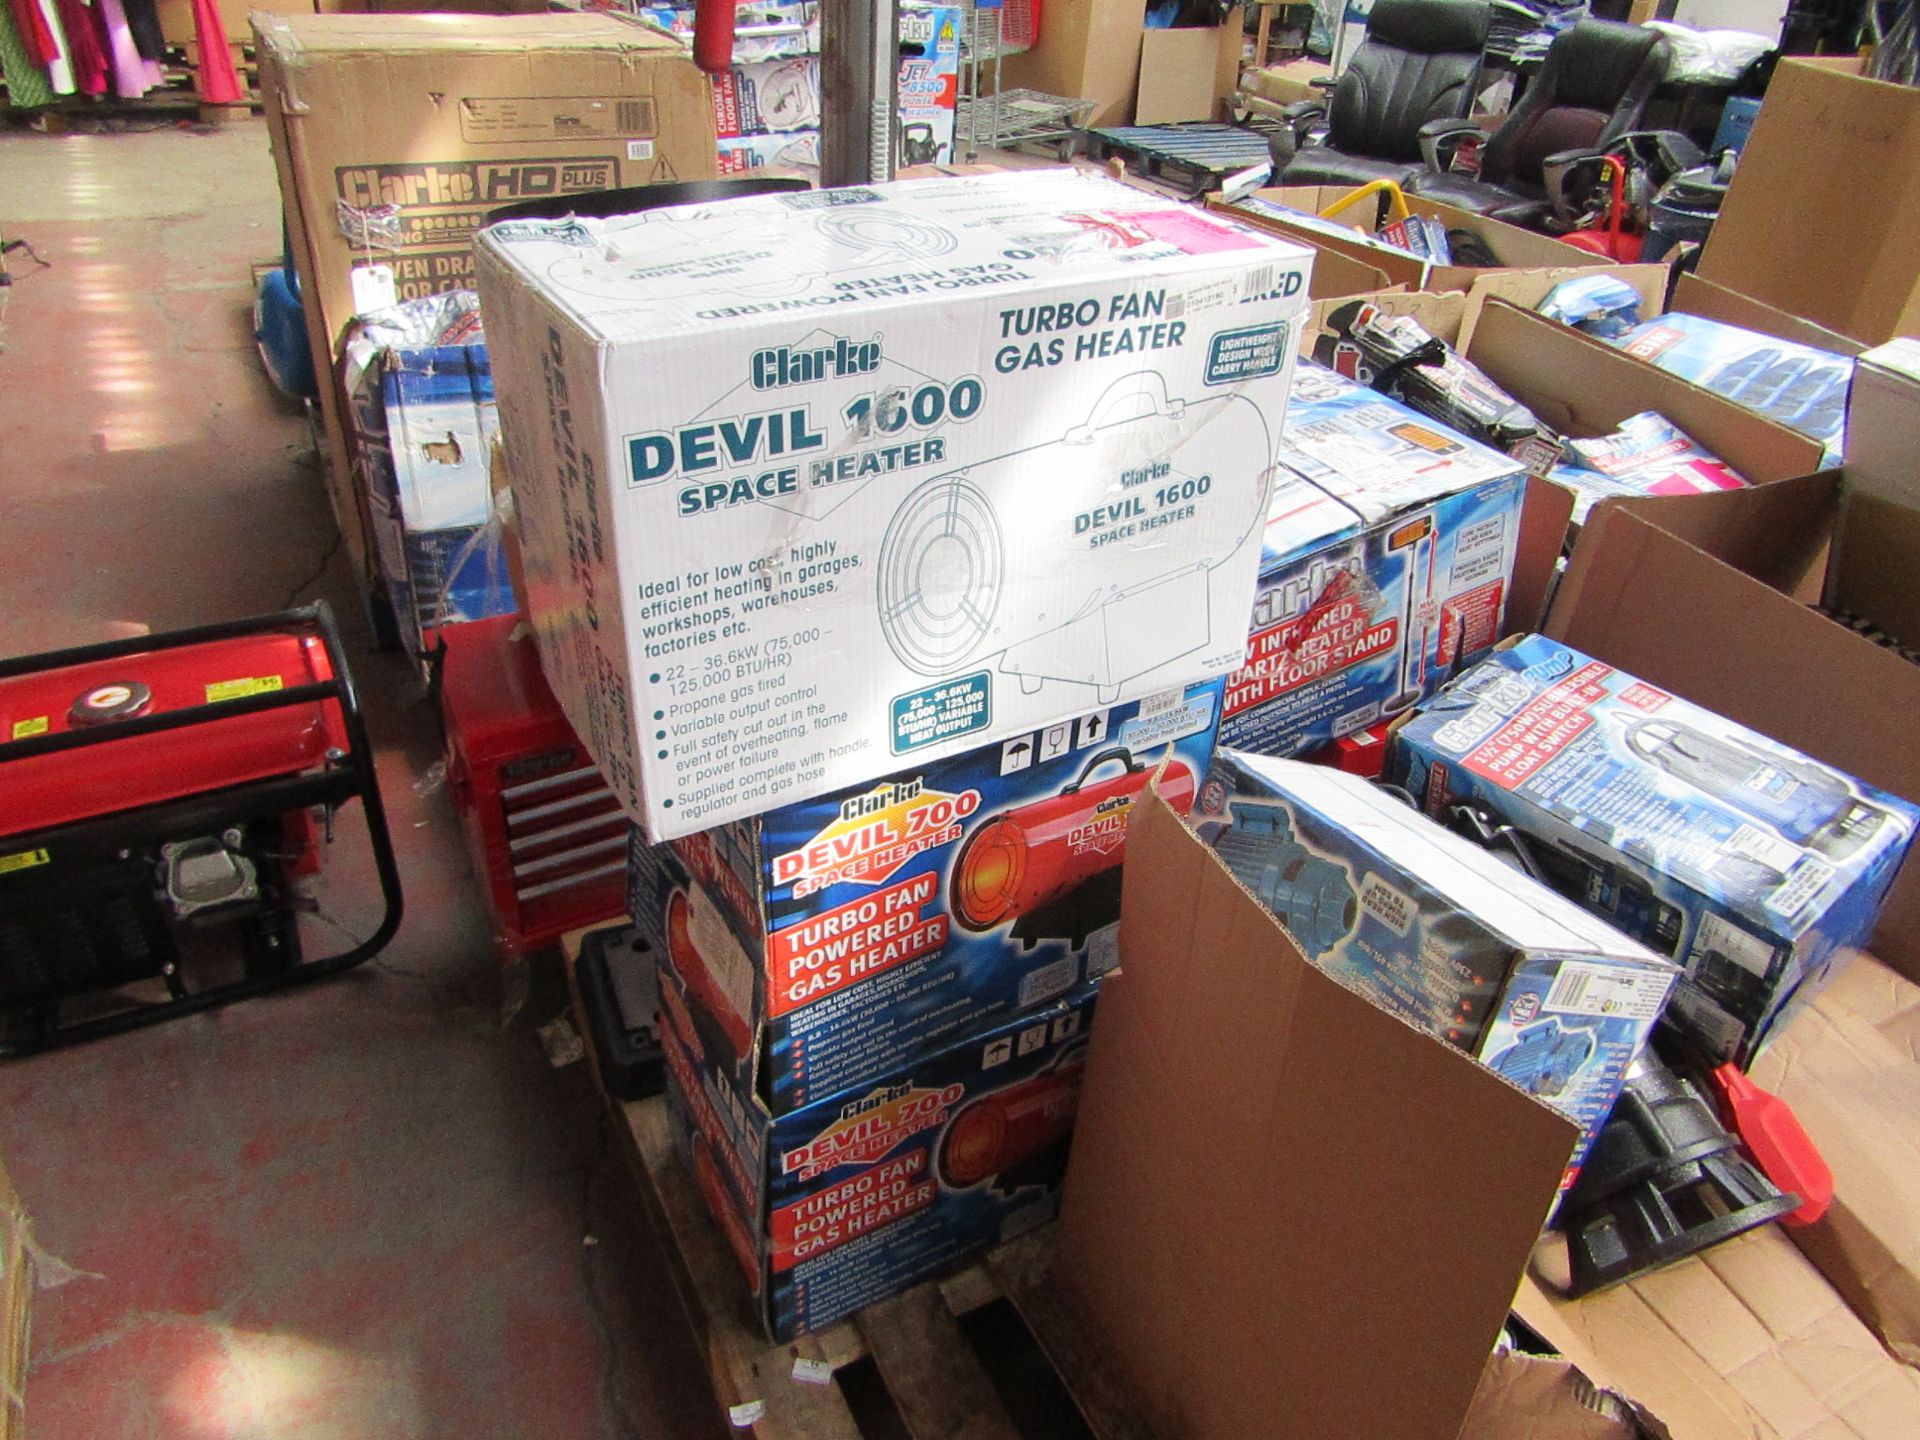 1x CL HEAT DEVIL700 230 1259 1x CL HEAT DEVIL1600 23 1259 1x CL HEAT DEVIL700 230 1259 This lot is a